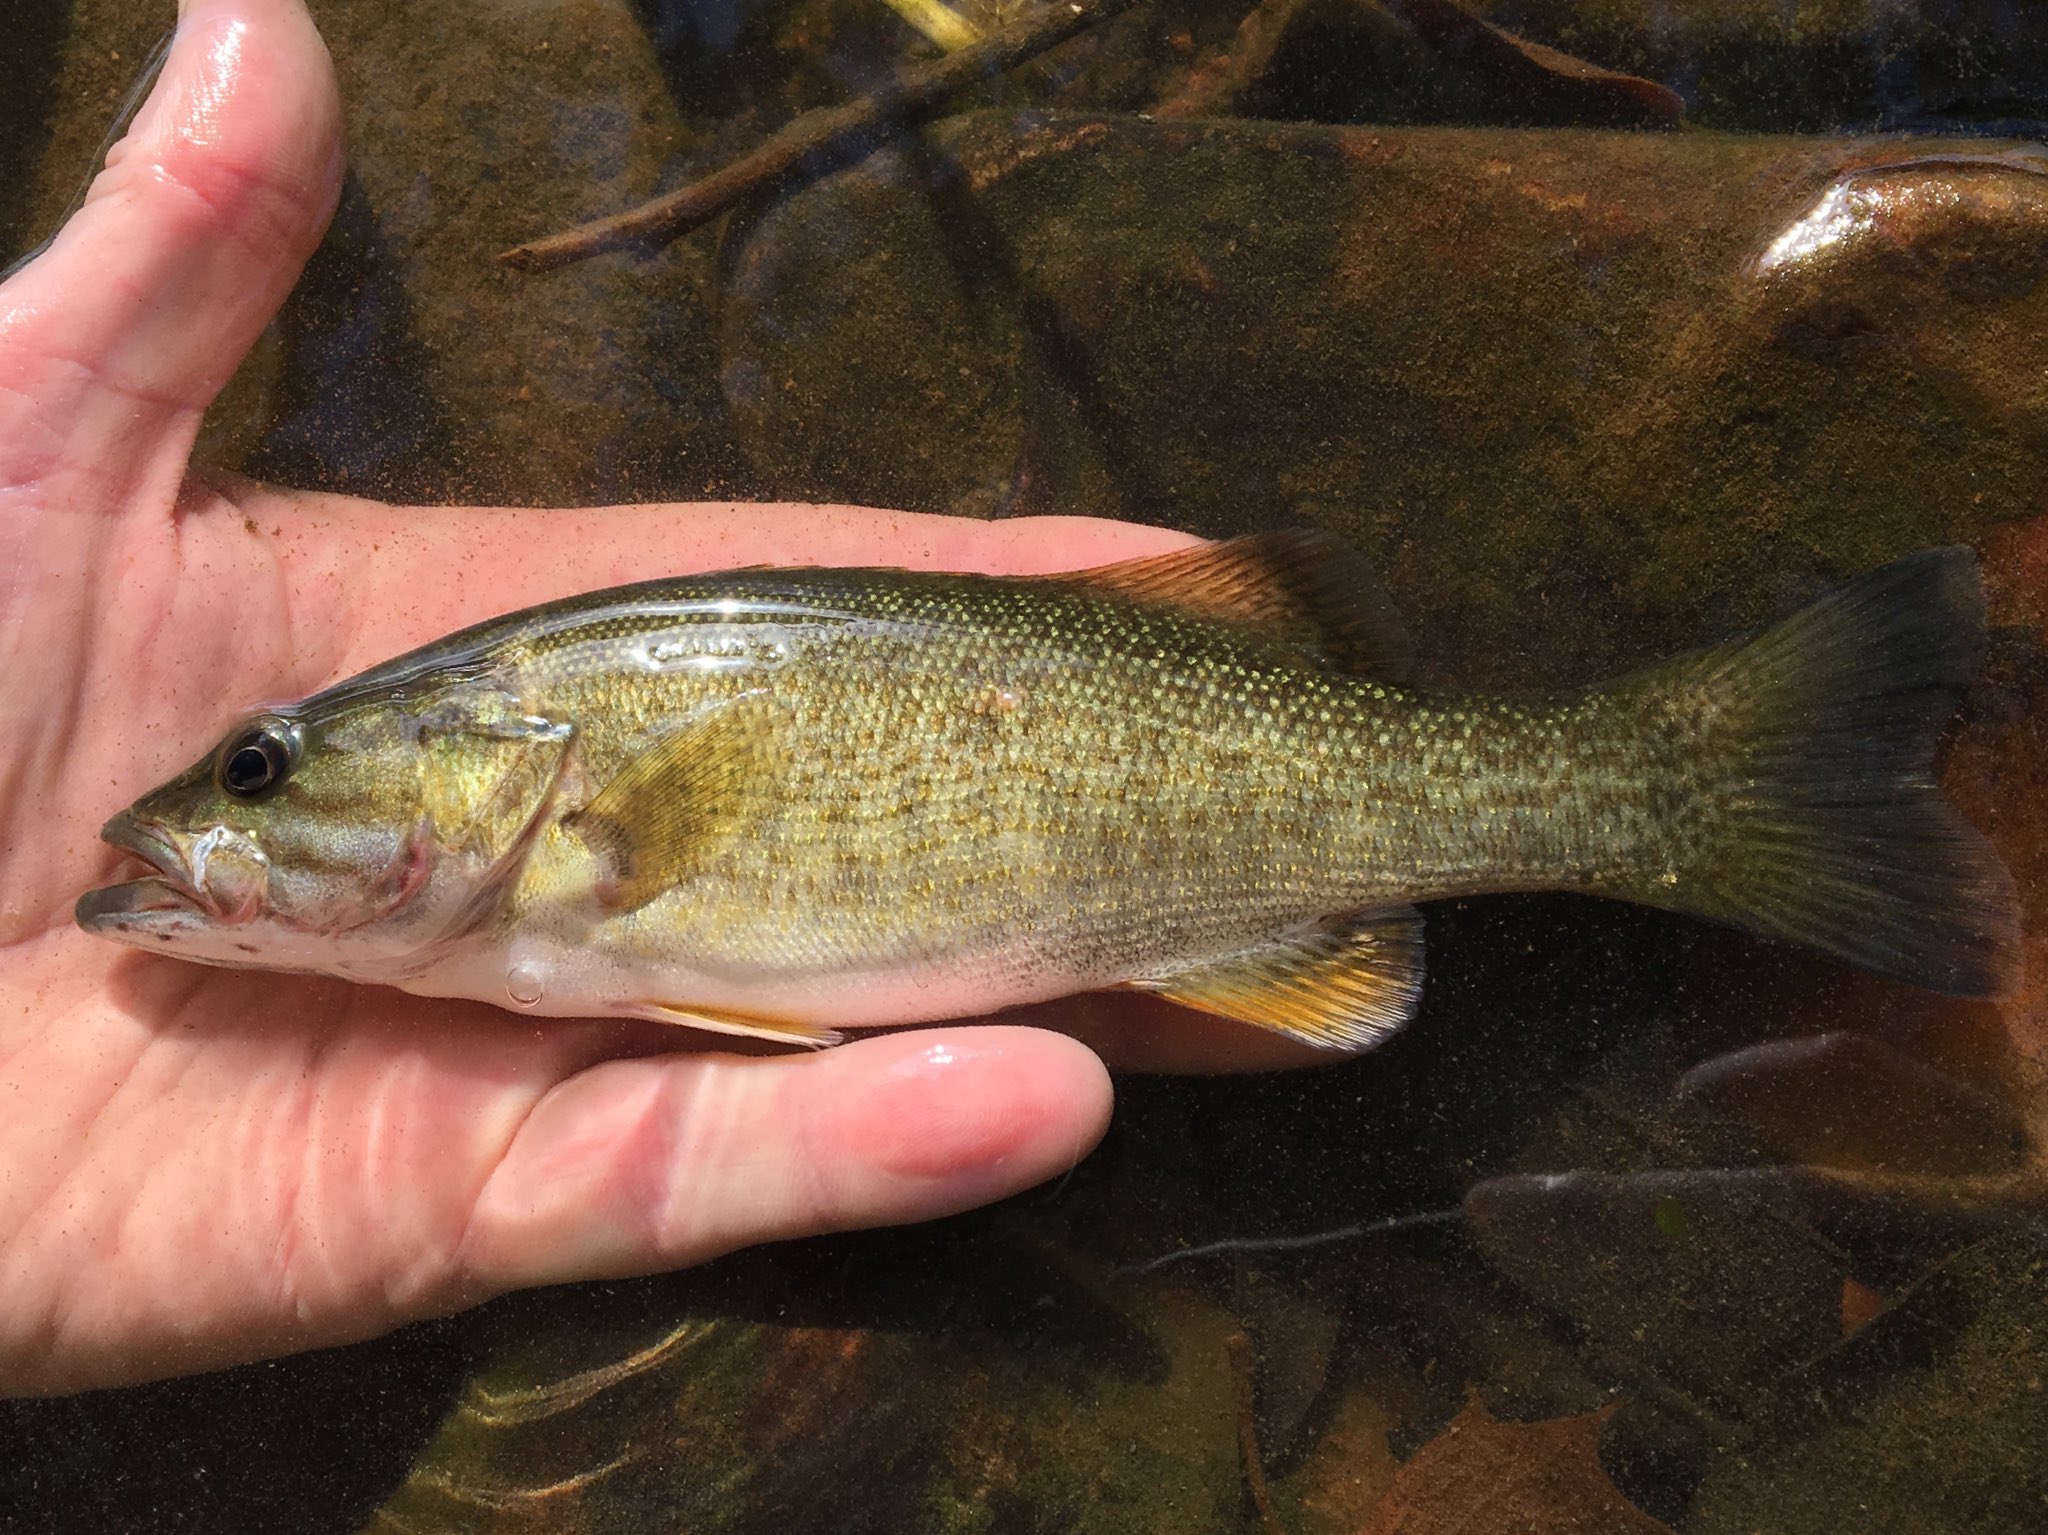 Taylor Fish Lab on X: We found mostly promising news! Most drainages  harbor their native lineage without much introgression with non-natives.  However, impoundments with recent Smallmouth Bass stockings have created  hybrid zones